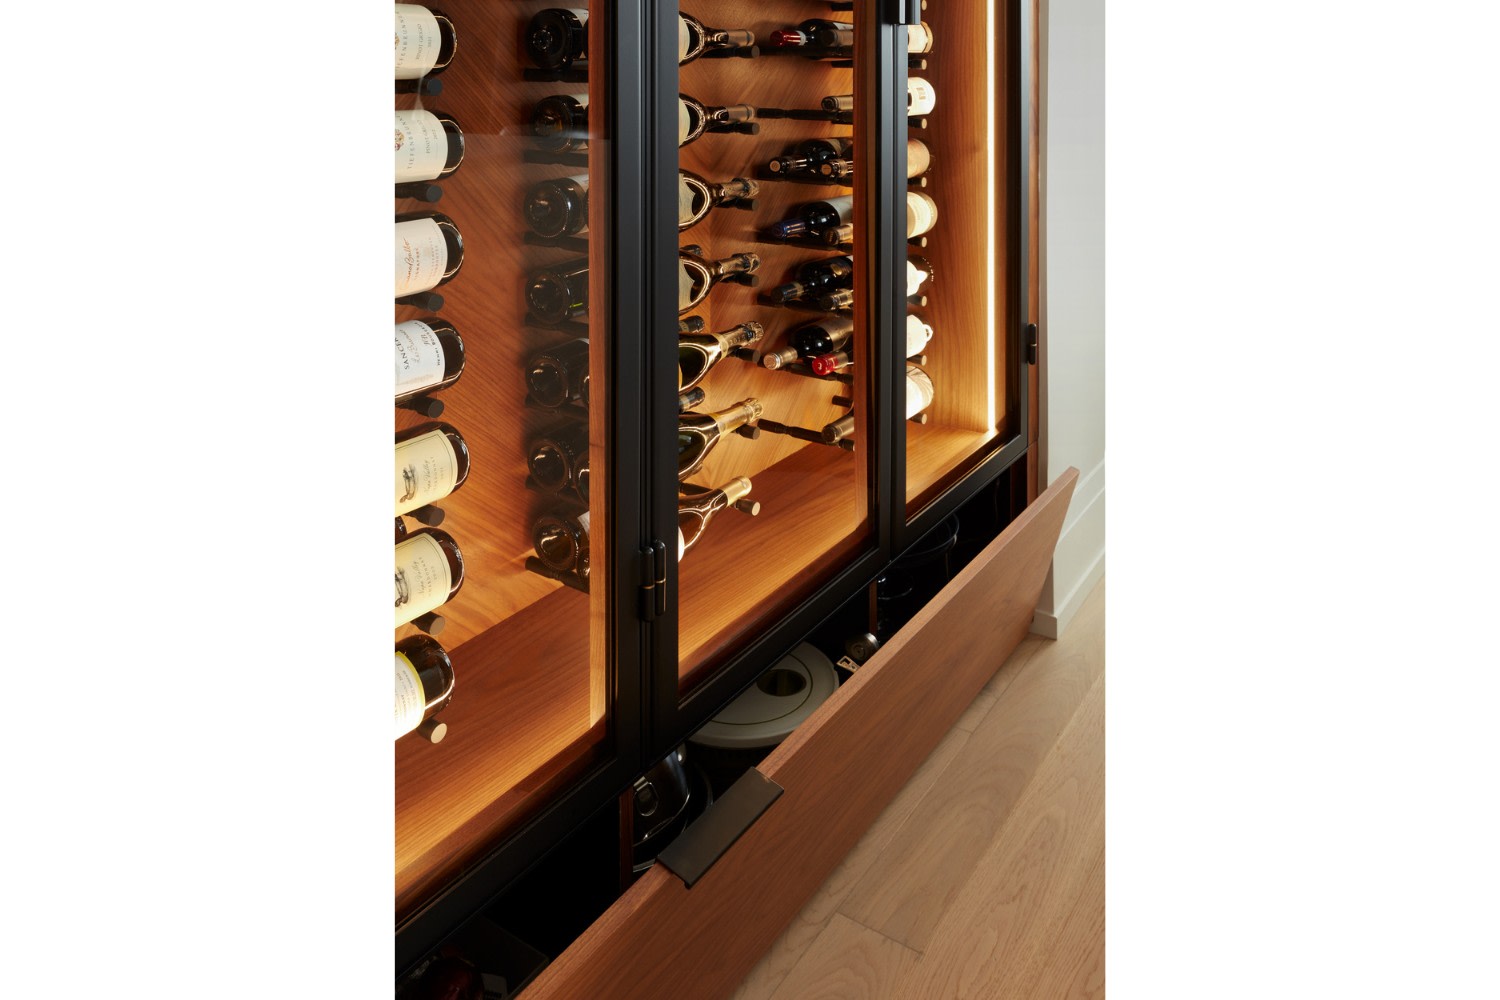 Project Park: Close Up Details of Lights in Wine Rack